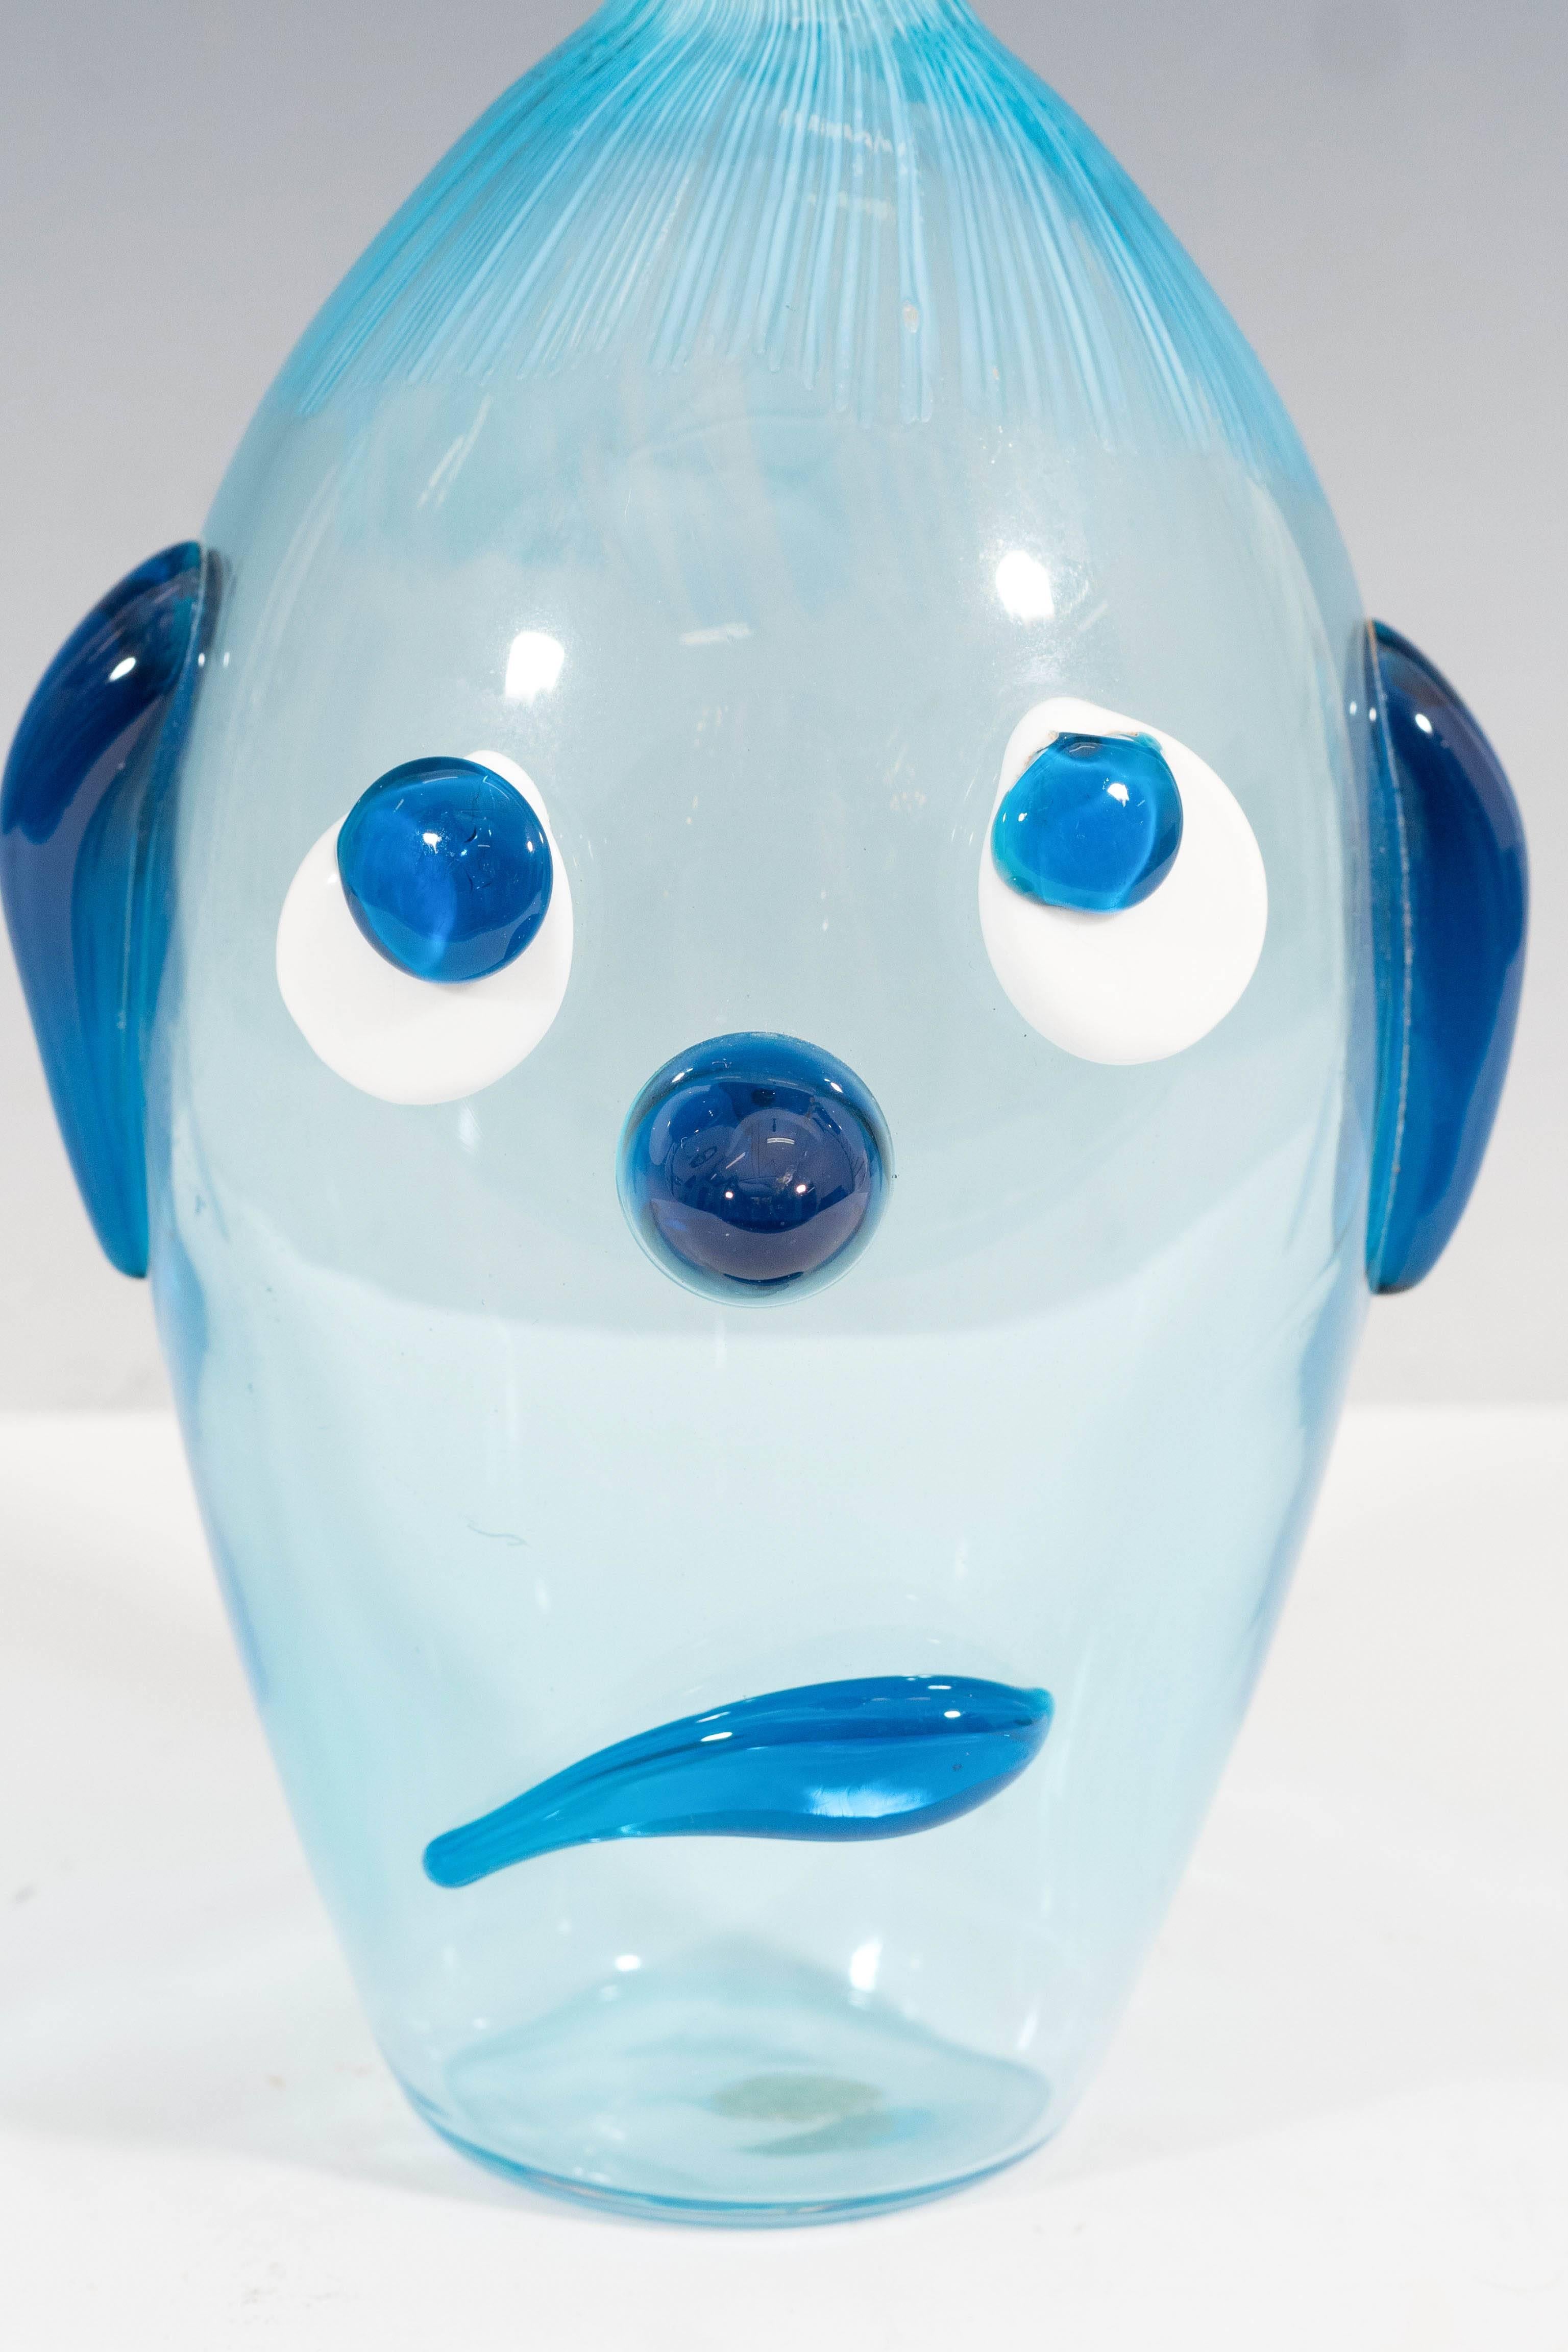 A vintage Murano glass decanter in varying shades of blue, produced in Venice during the 1950s and 1960s by Vetreria Fratelli Toso, with round glass stopper over a handcrafted and blown body, decorated with the features of an expressively sad dog.